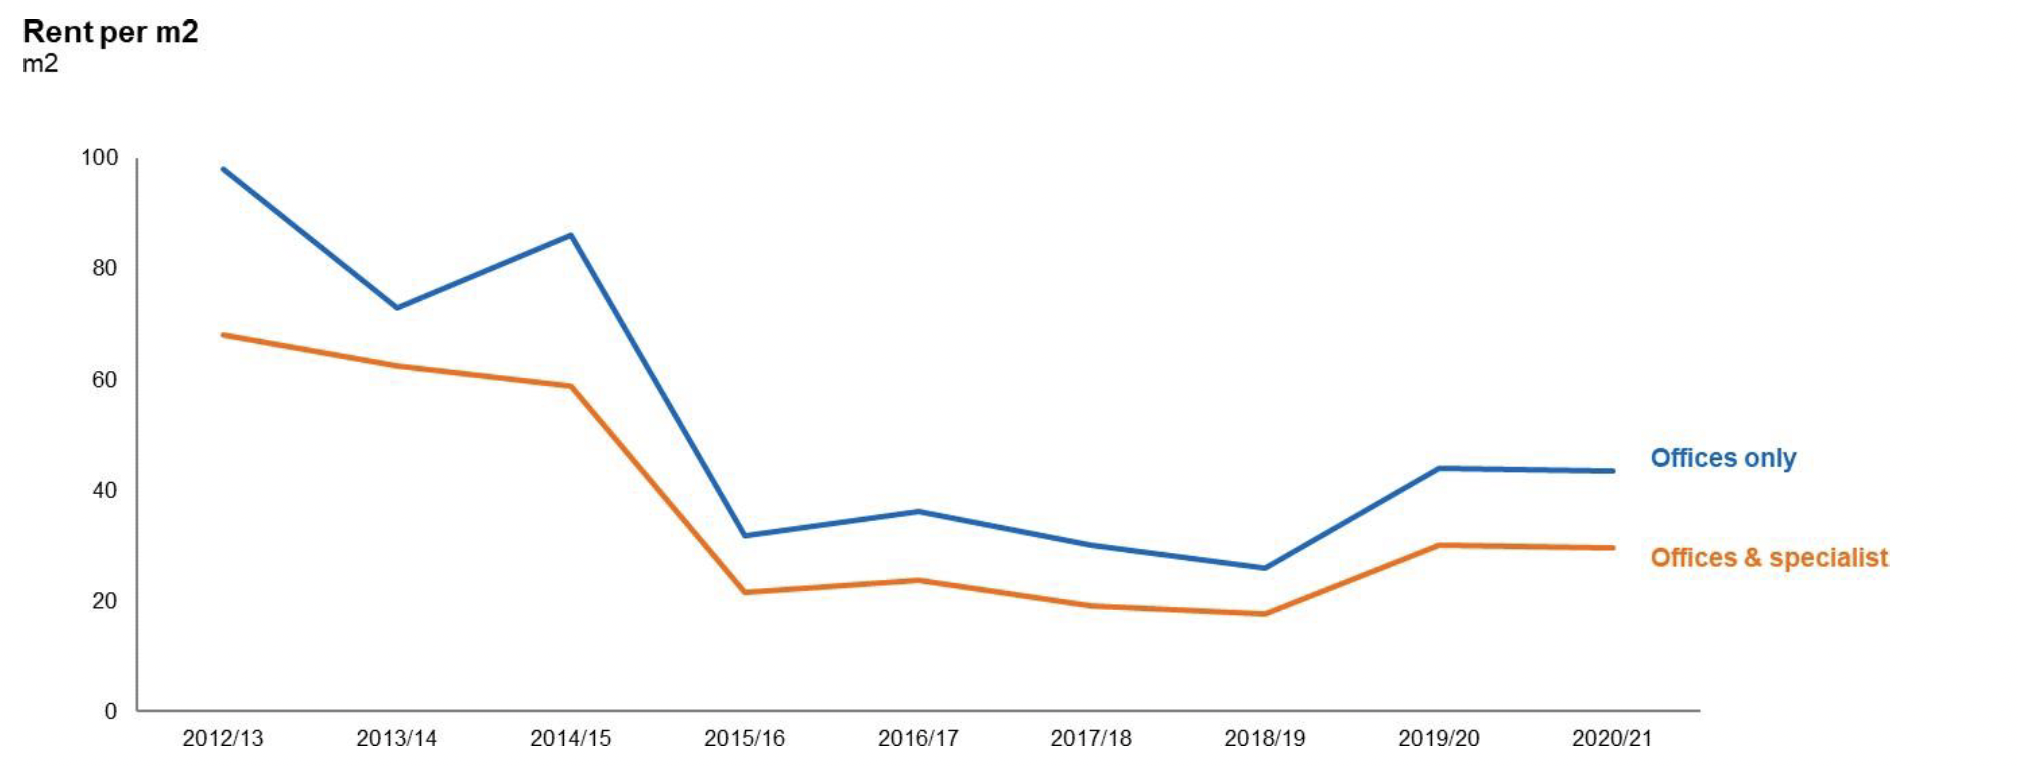 4. A graph showing the annual rent per metre squared (m2) from 2012/13 to 2020/21. There are two lines, one line shows the office and specialist building costs which currently sits at £30 and the other line which shows offices only at £44.